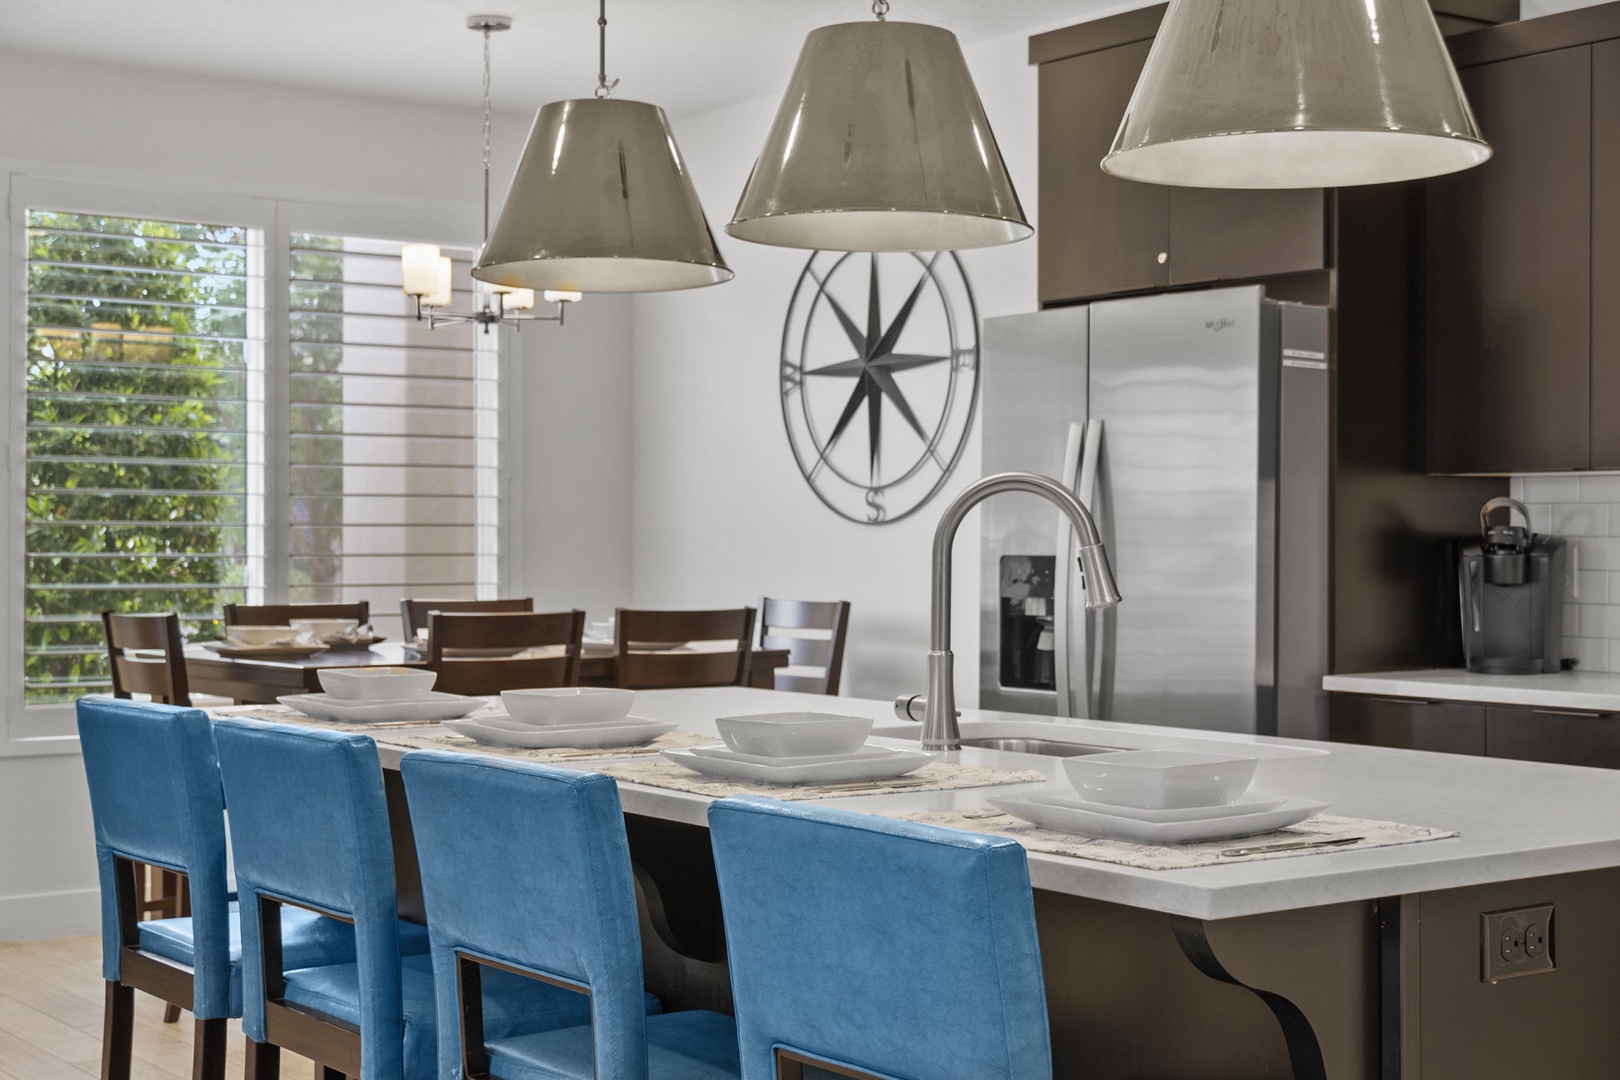 Enjoy comfortable dining seating for 6 and counter seating for 4 in the sleek Kitchen/Dining spaces